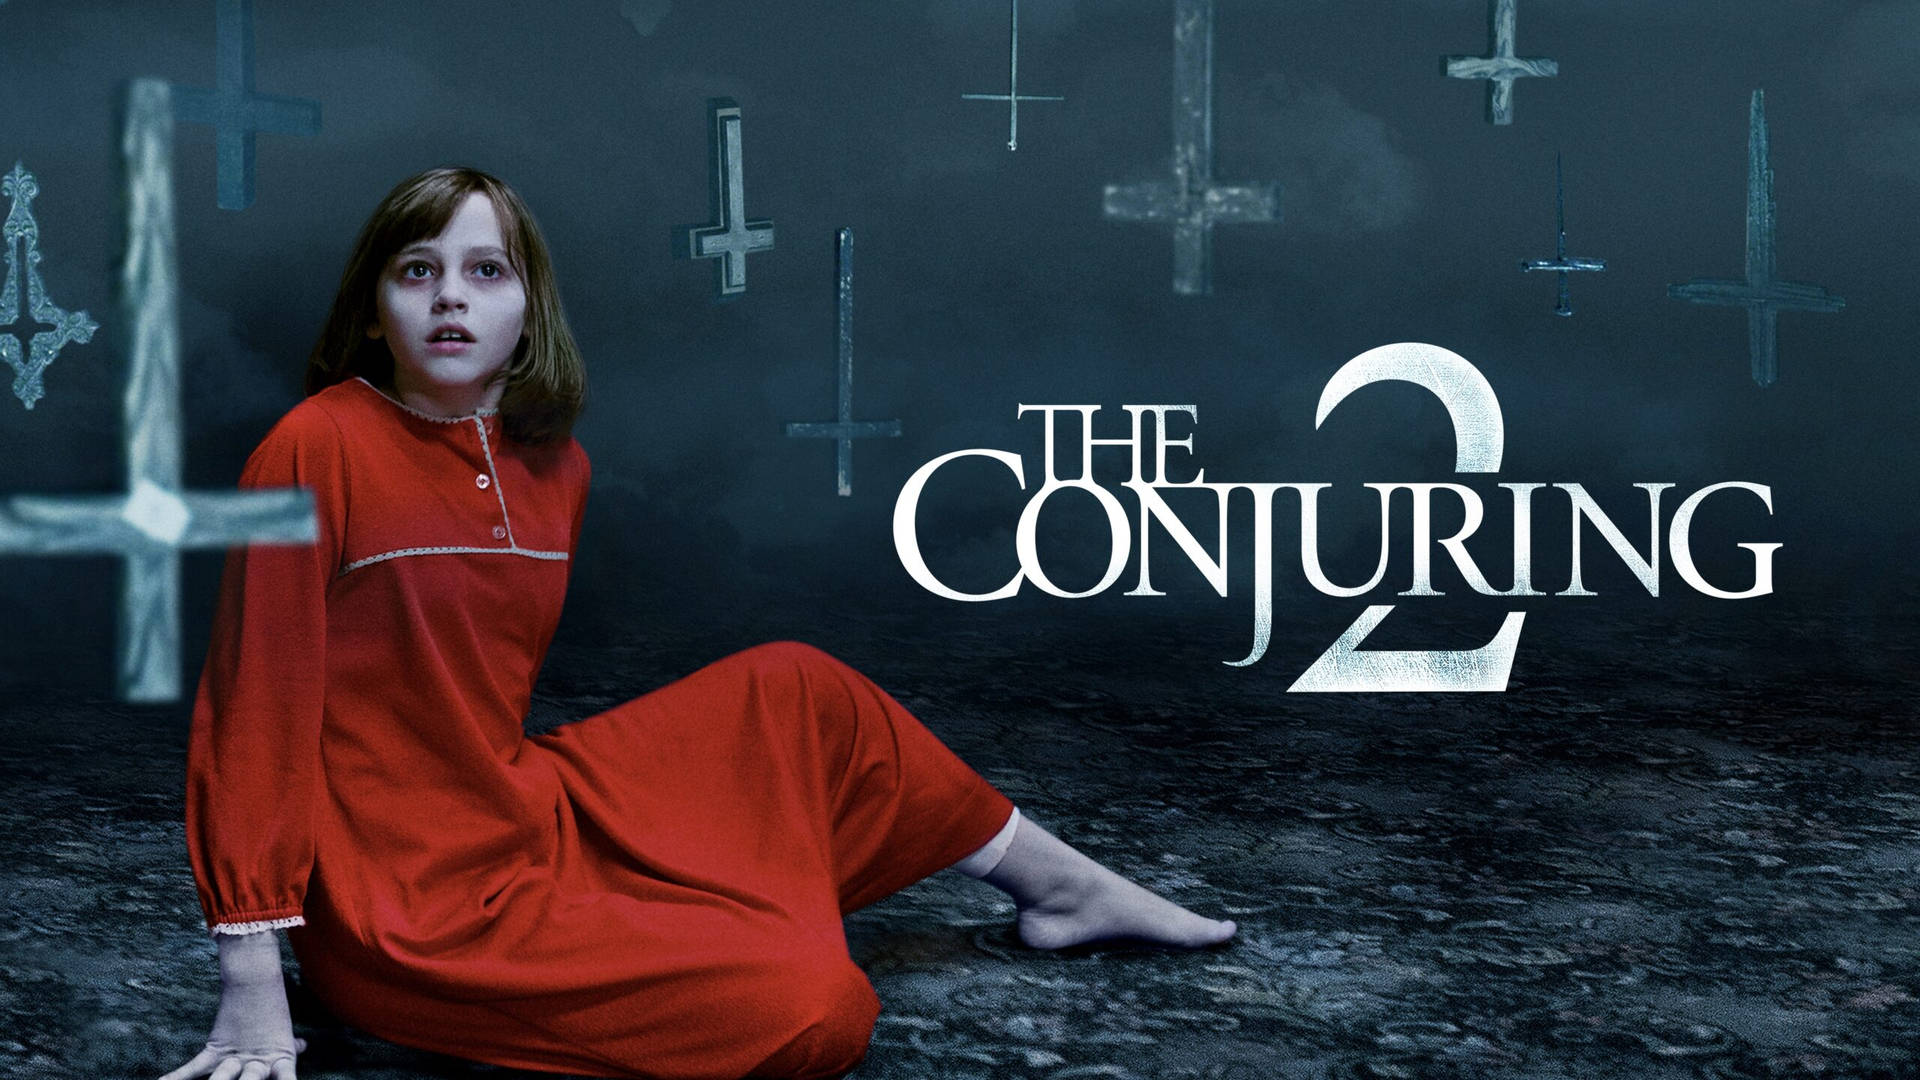 40-facts-about-the-movie-the-conjuring-2